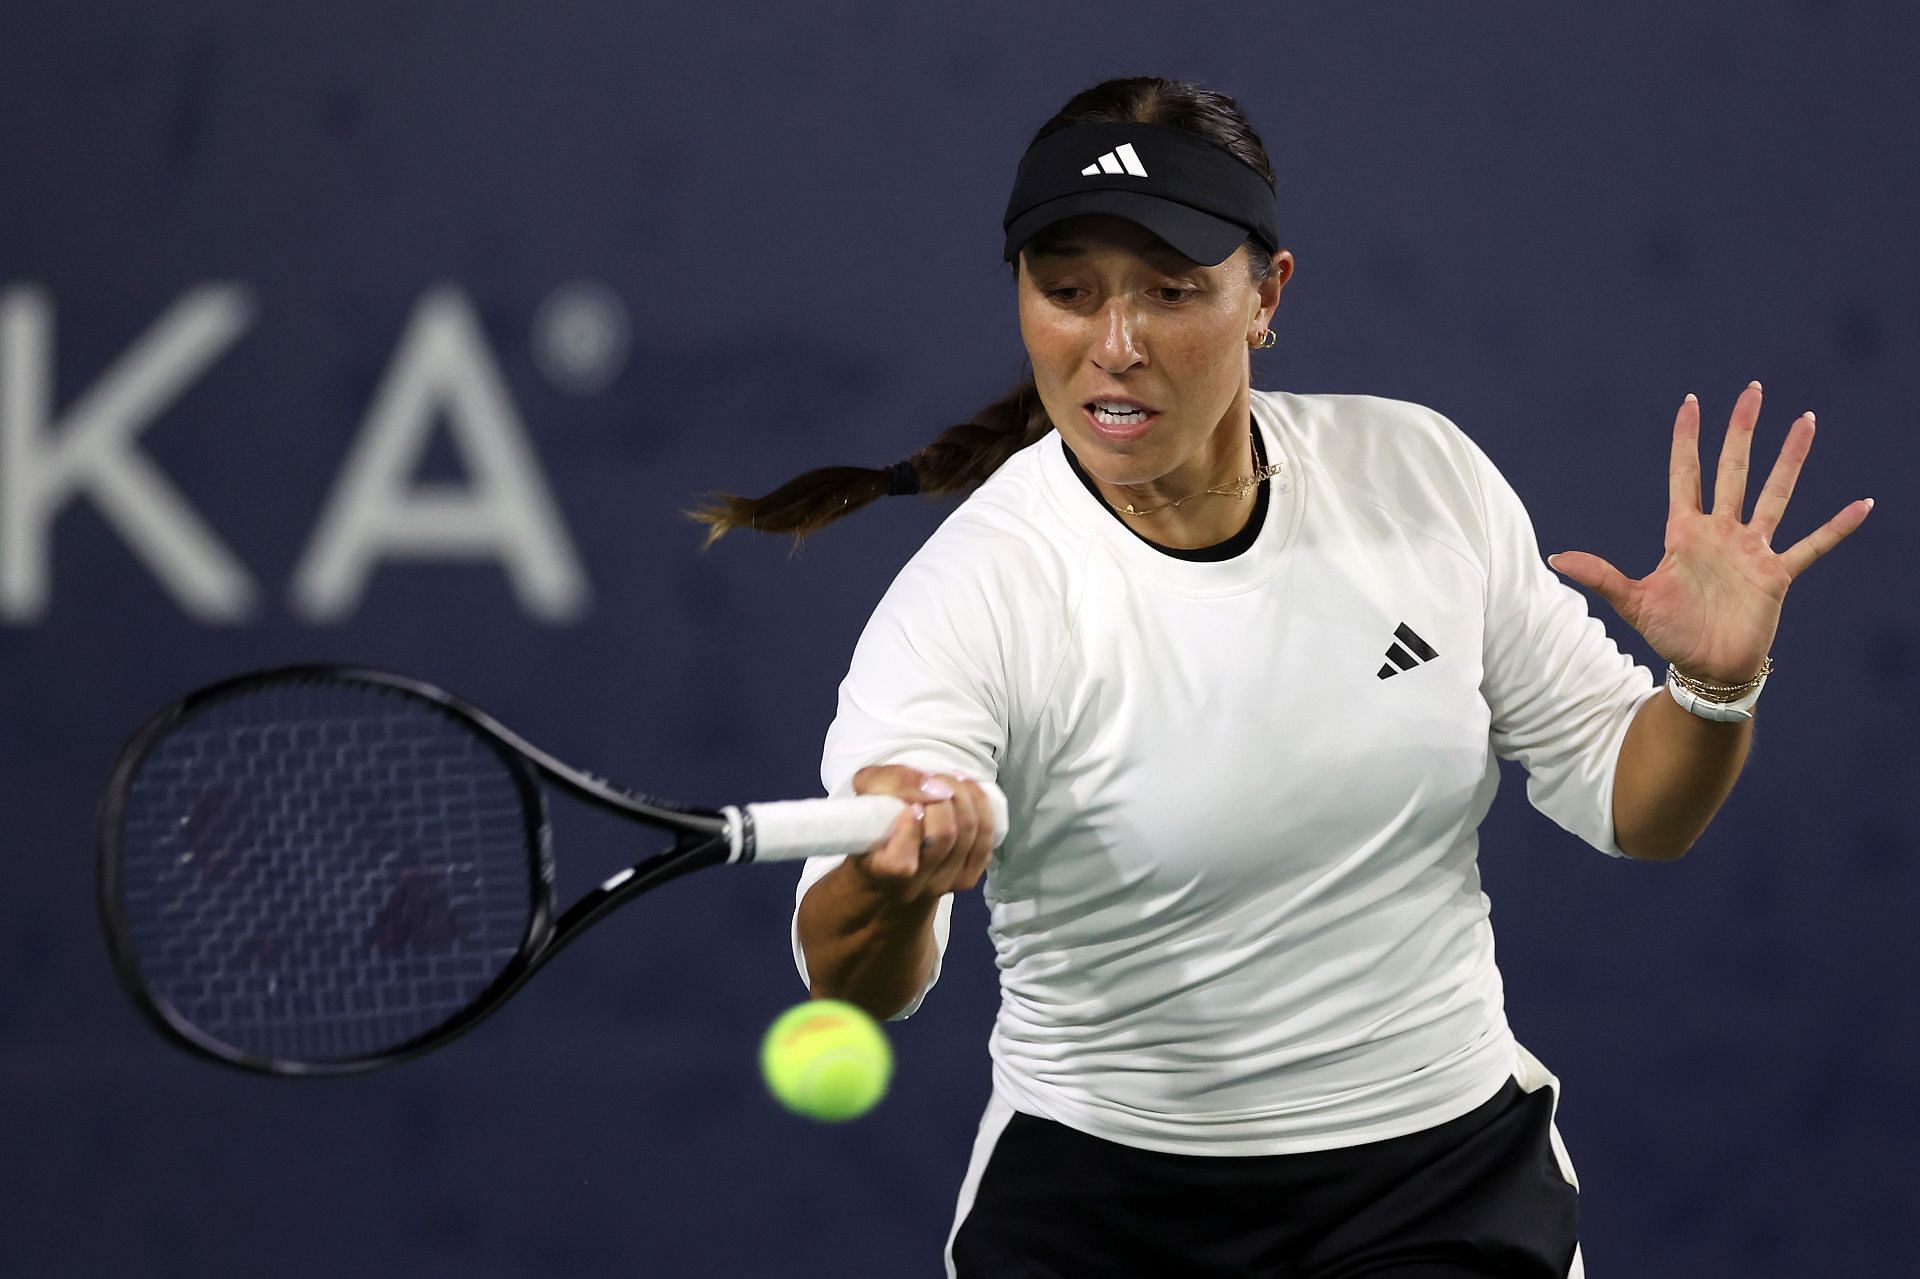 Top five seeds at the Indian Wells ft Iga Swiatek and Jessica Pegula on the main tour